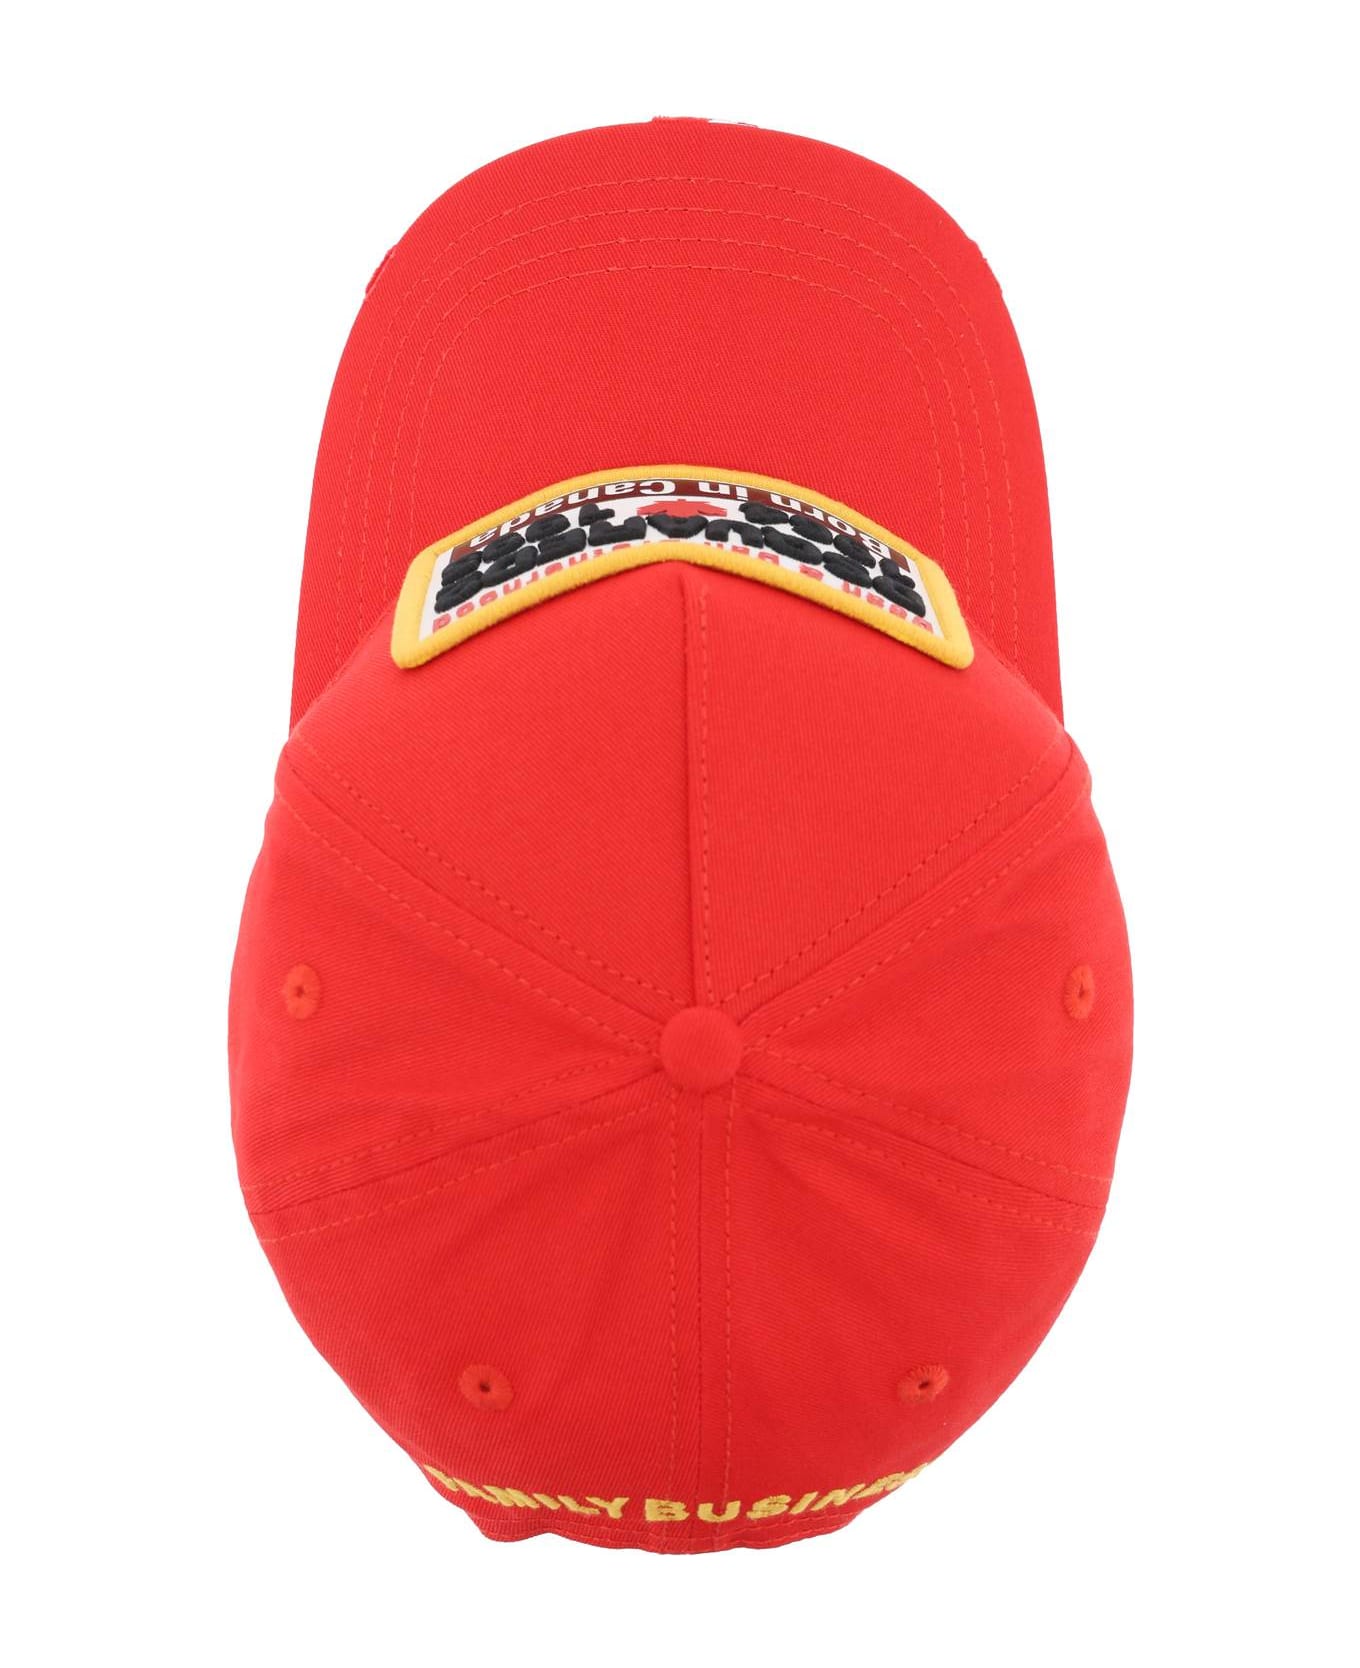 Dsquared2 Logo Embroidered Distressed Baseball Cap - Red